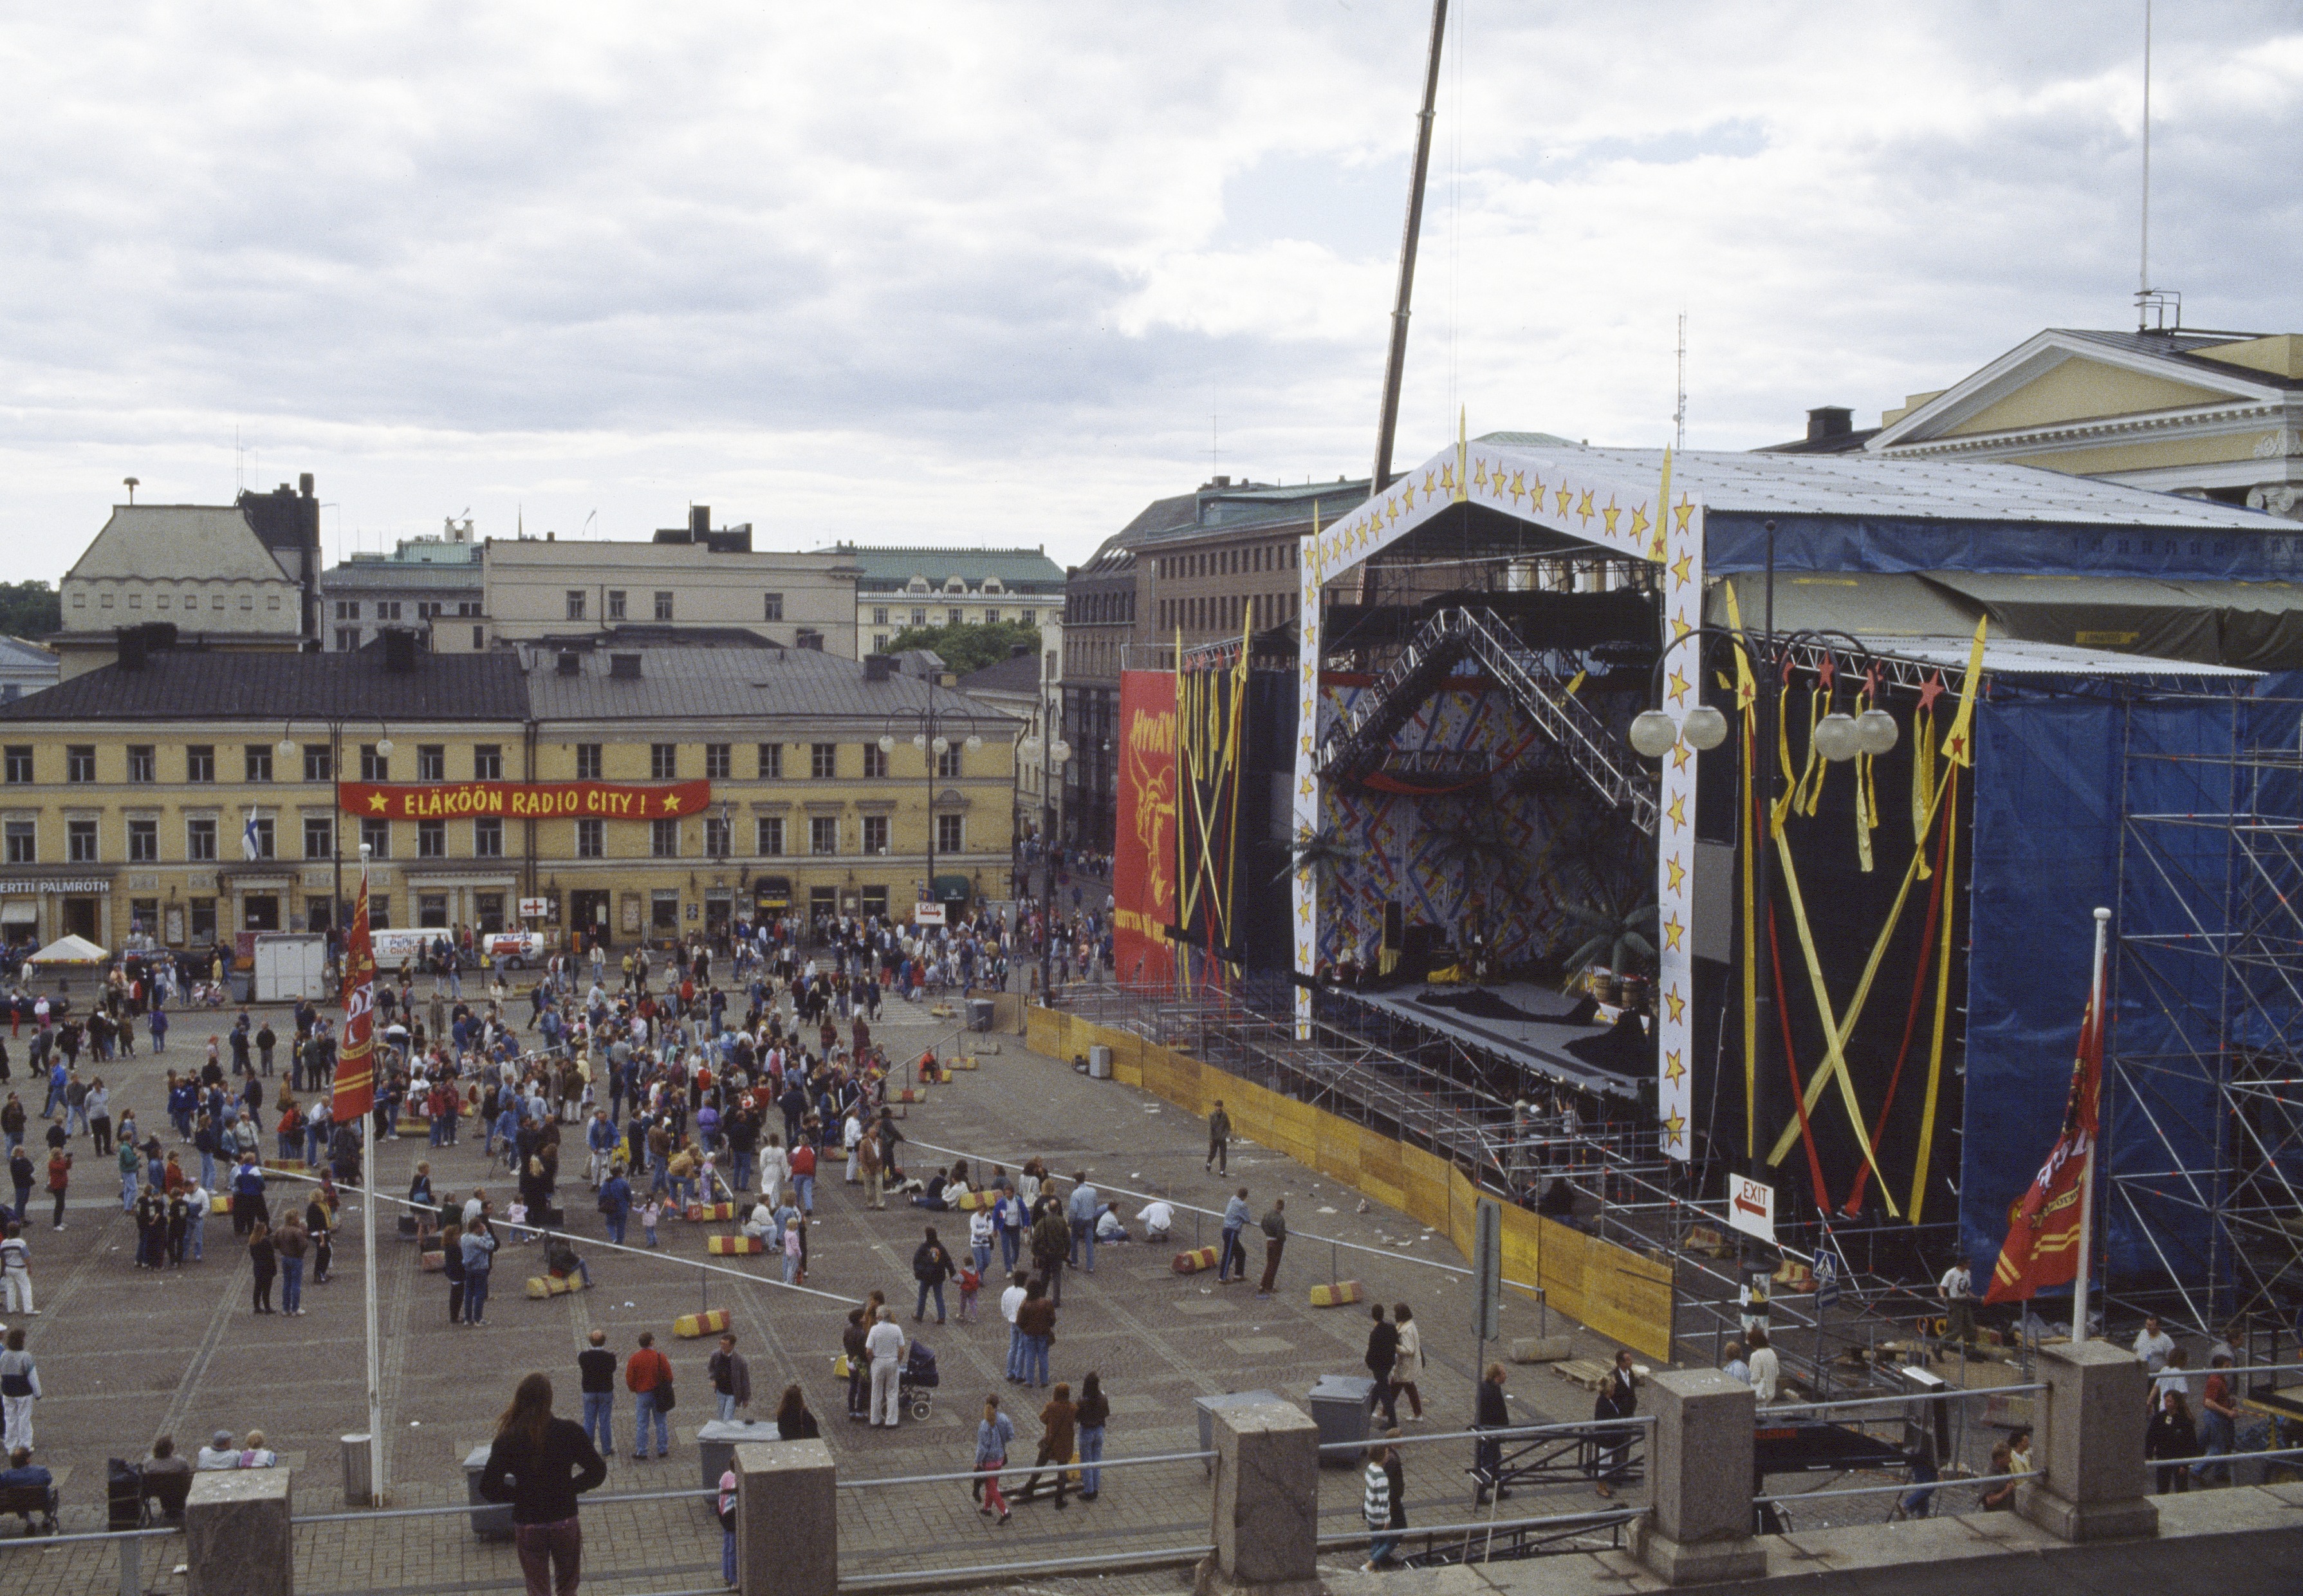 The erection of the stage for the Balalaika Show City of Helsinki